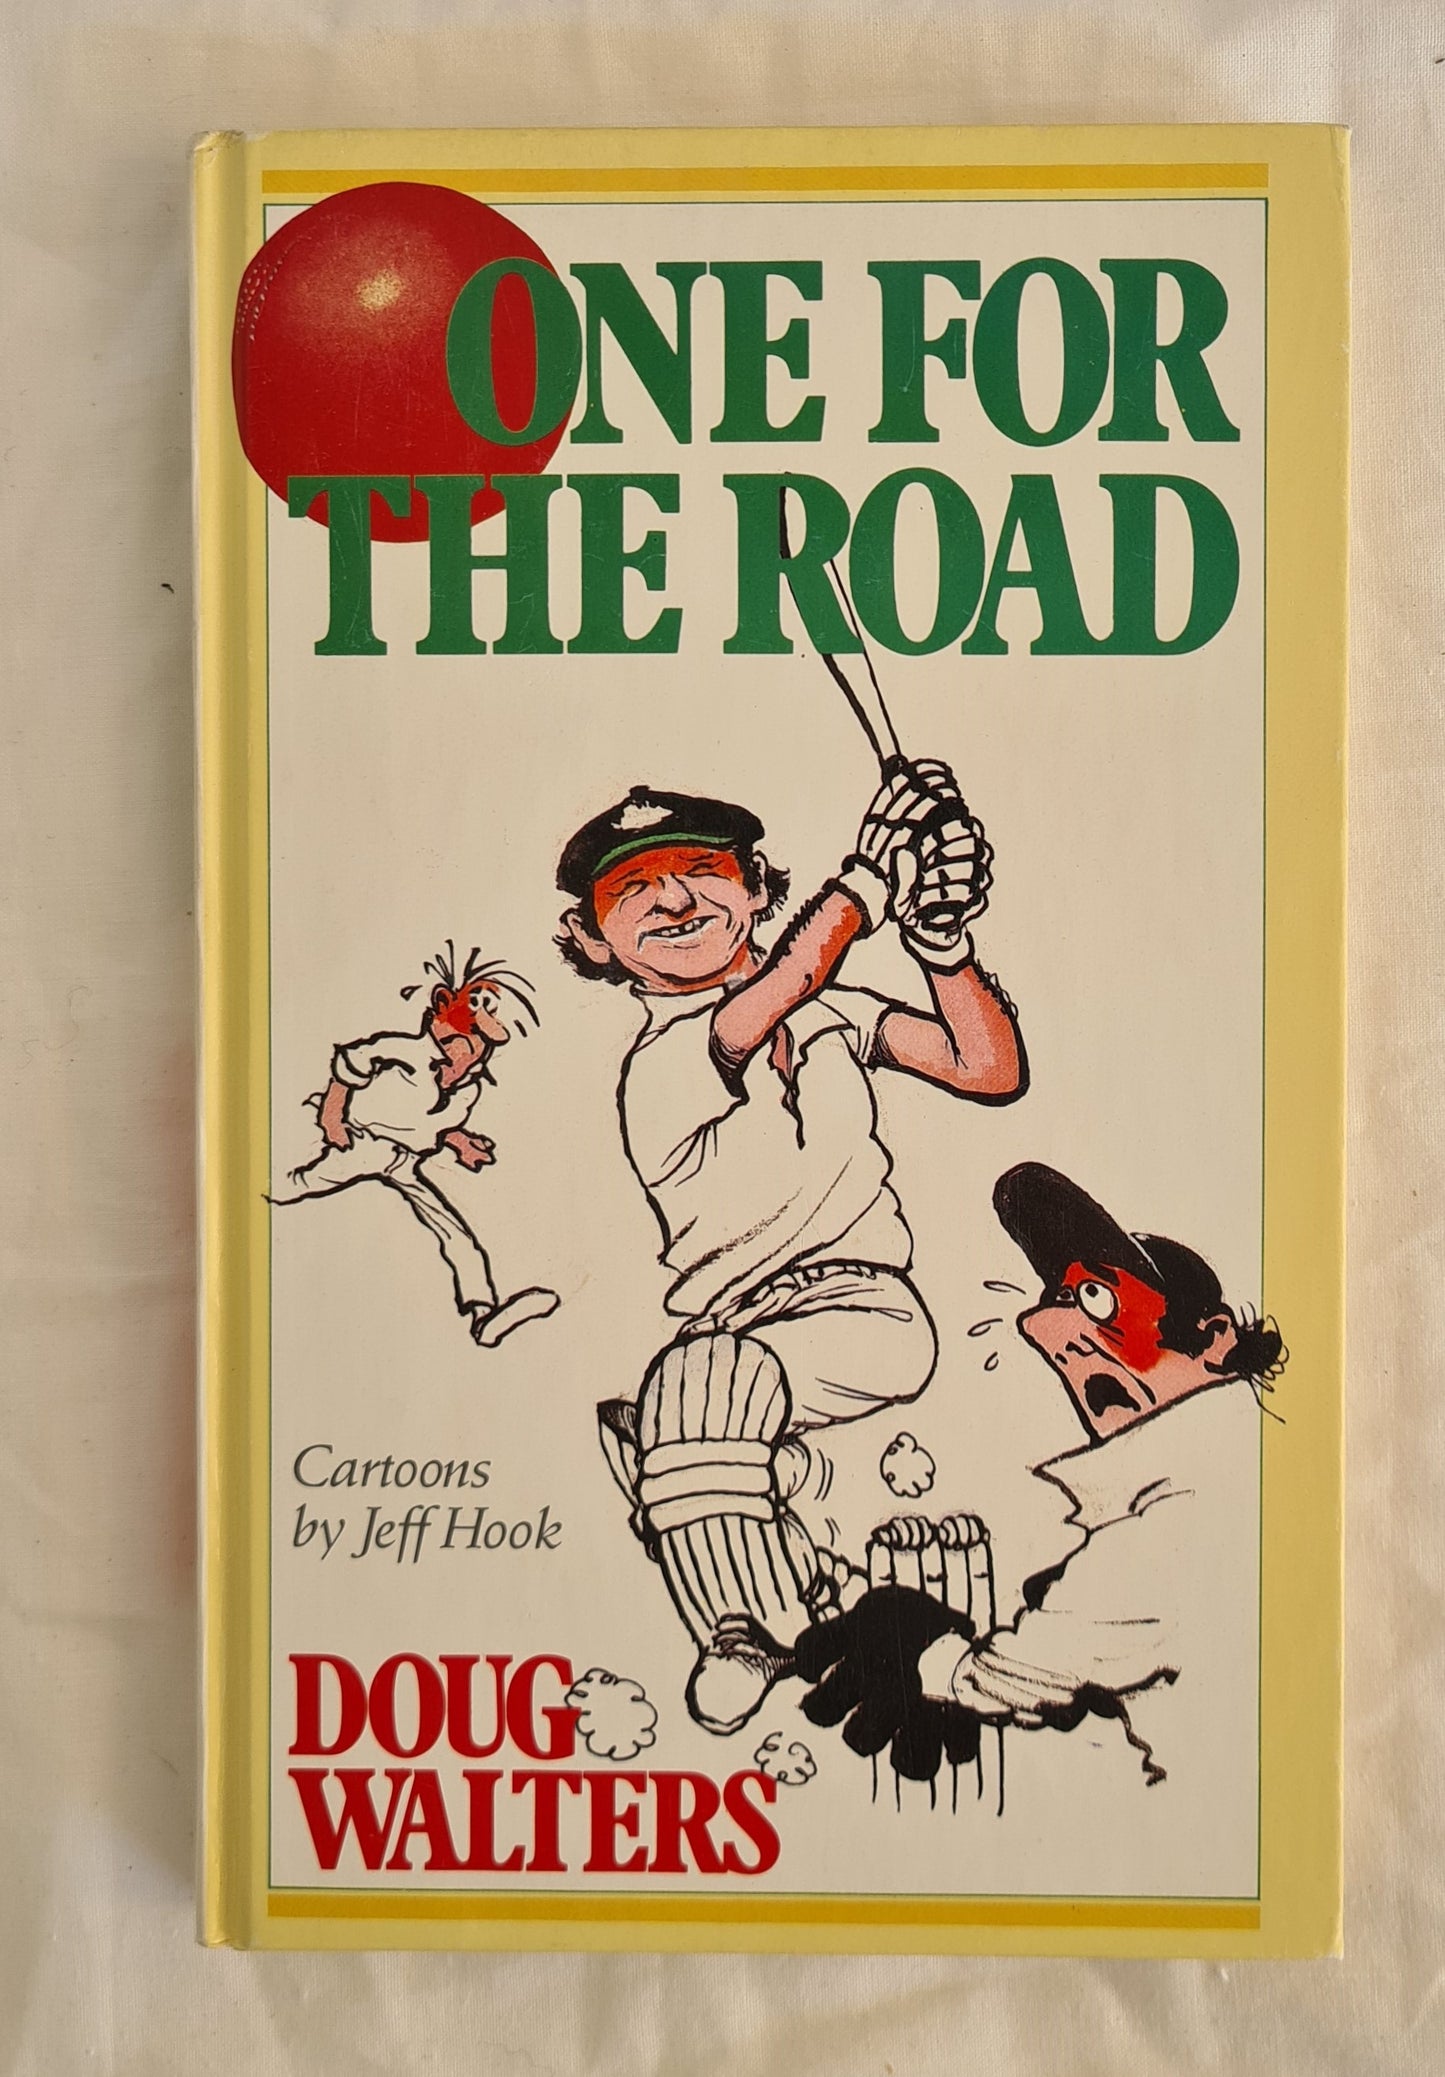 One For the Road by Doug Walters